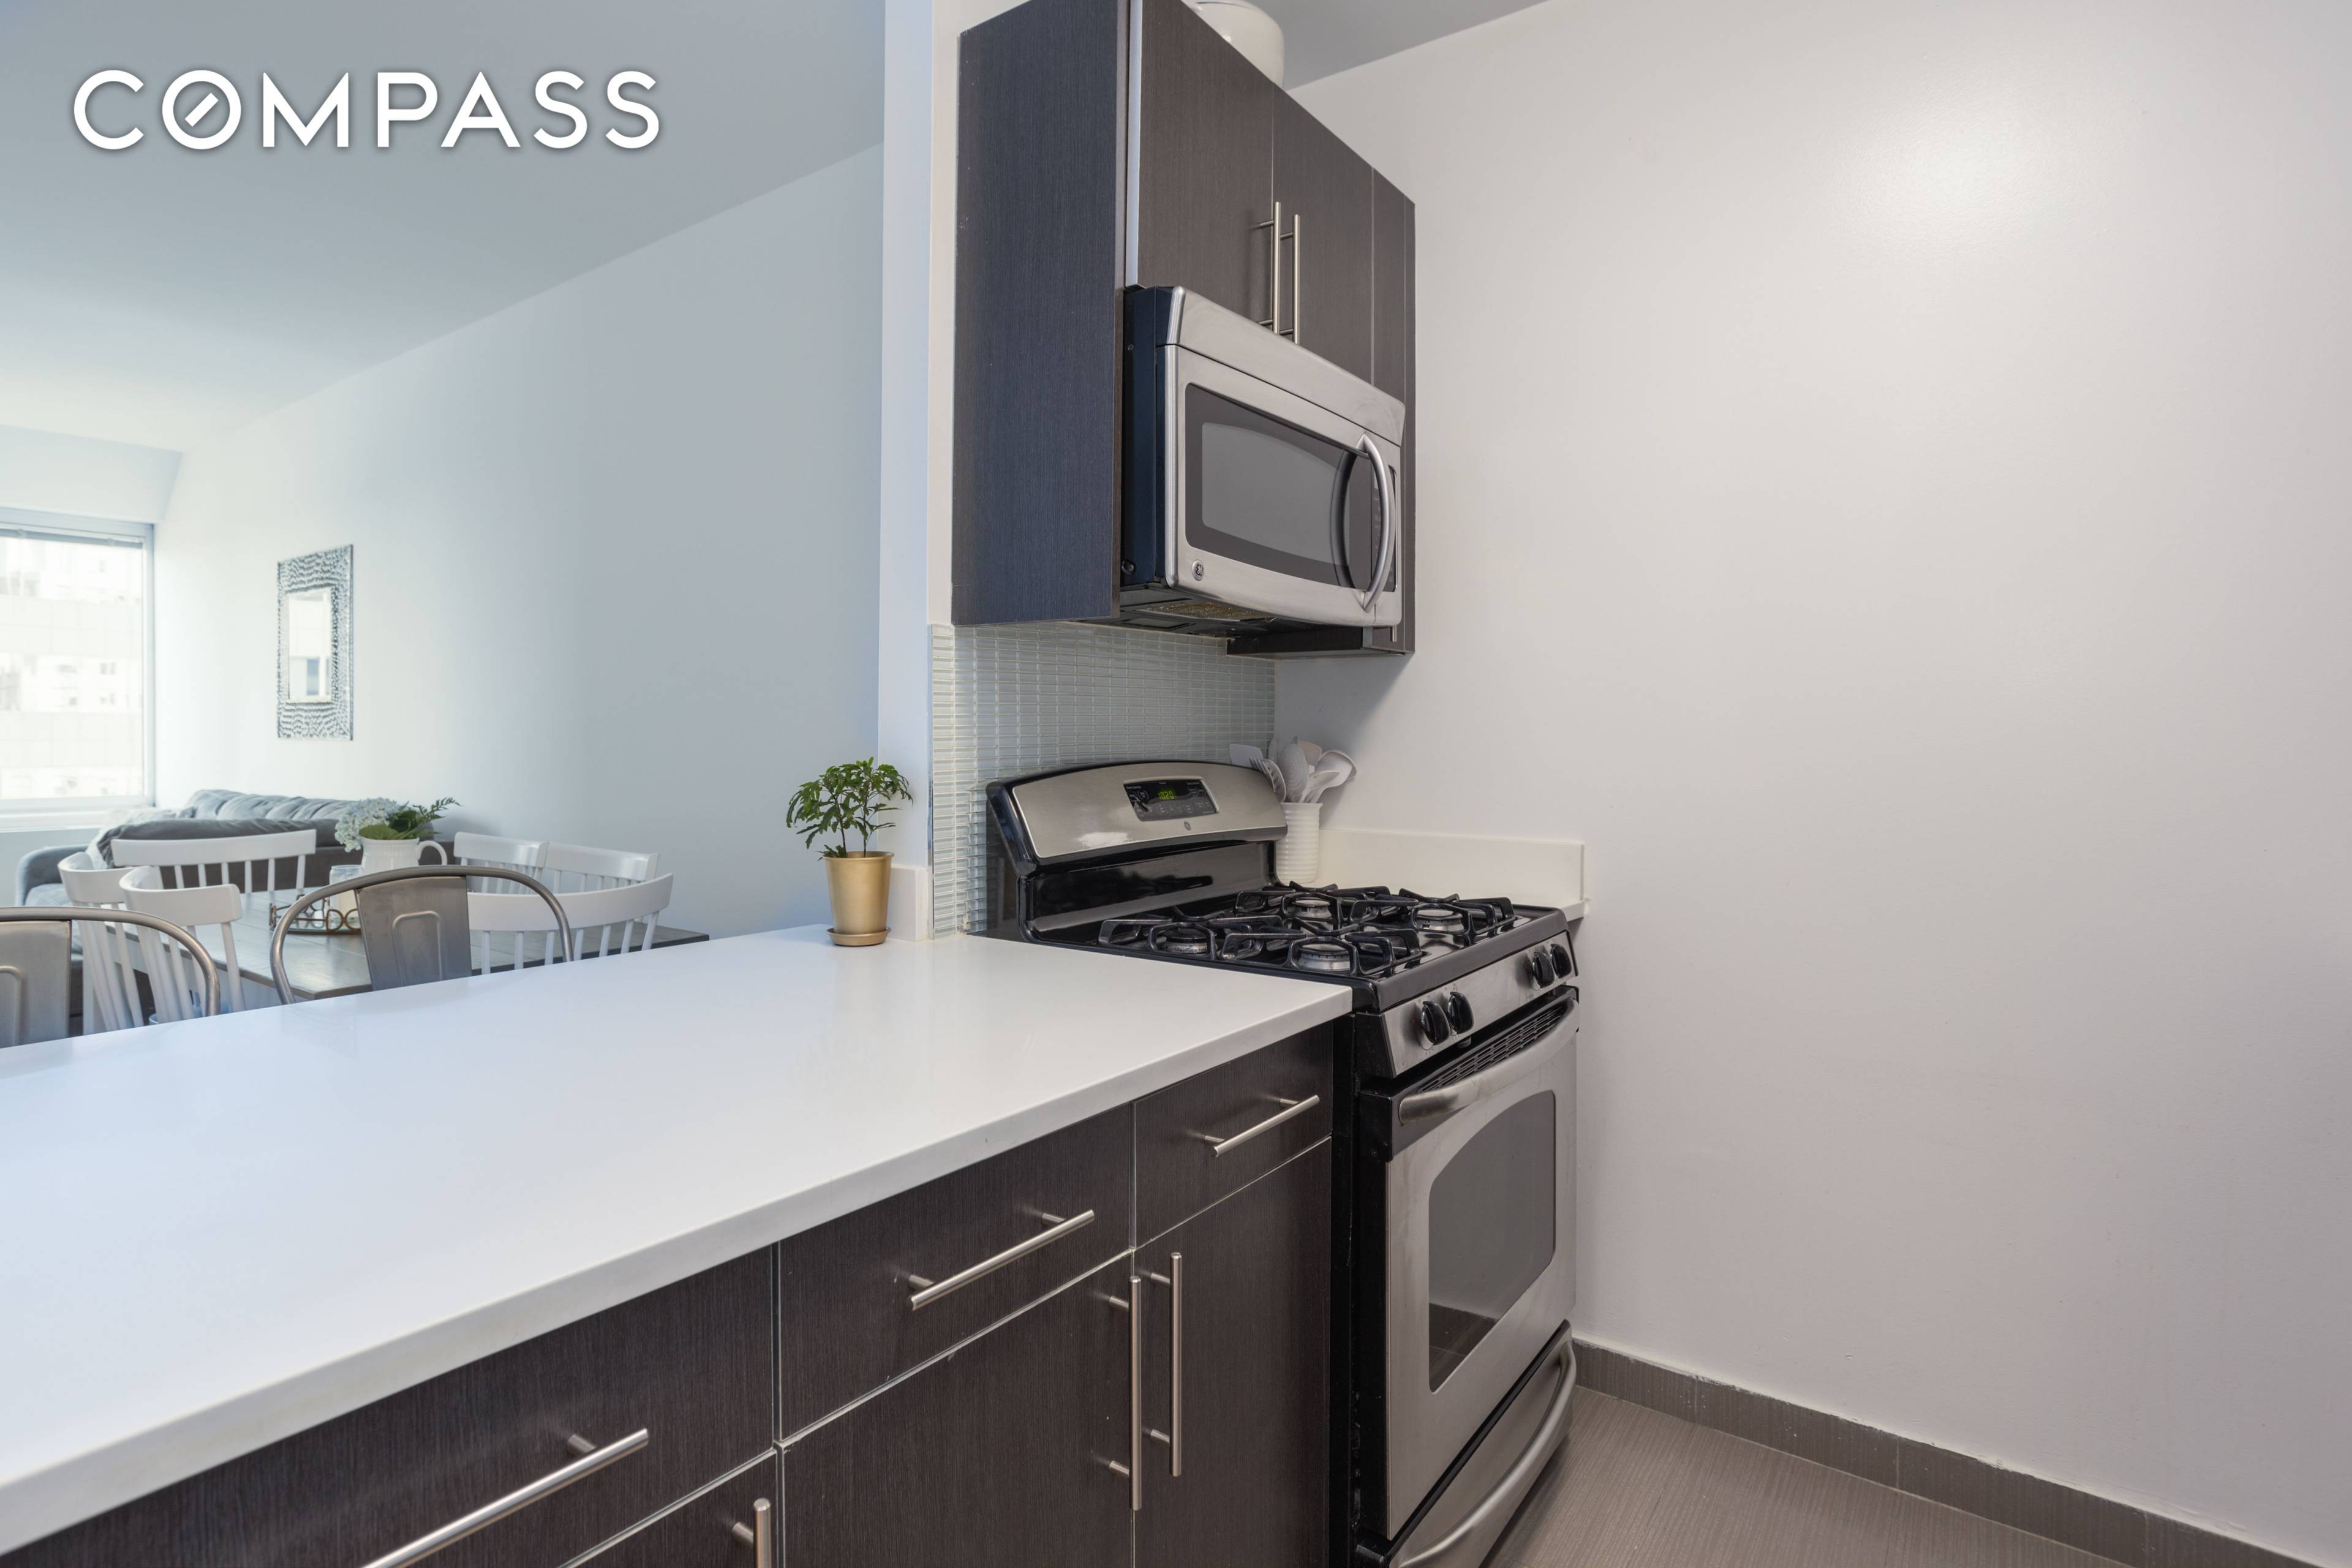 Spacious 900 sq ft one bedroom home office apartment offering plenty of natural light, 10' ceilings and spectacular views of East River and the Brooklyn Bridge.